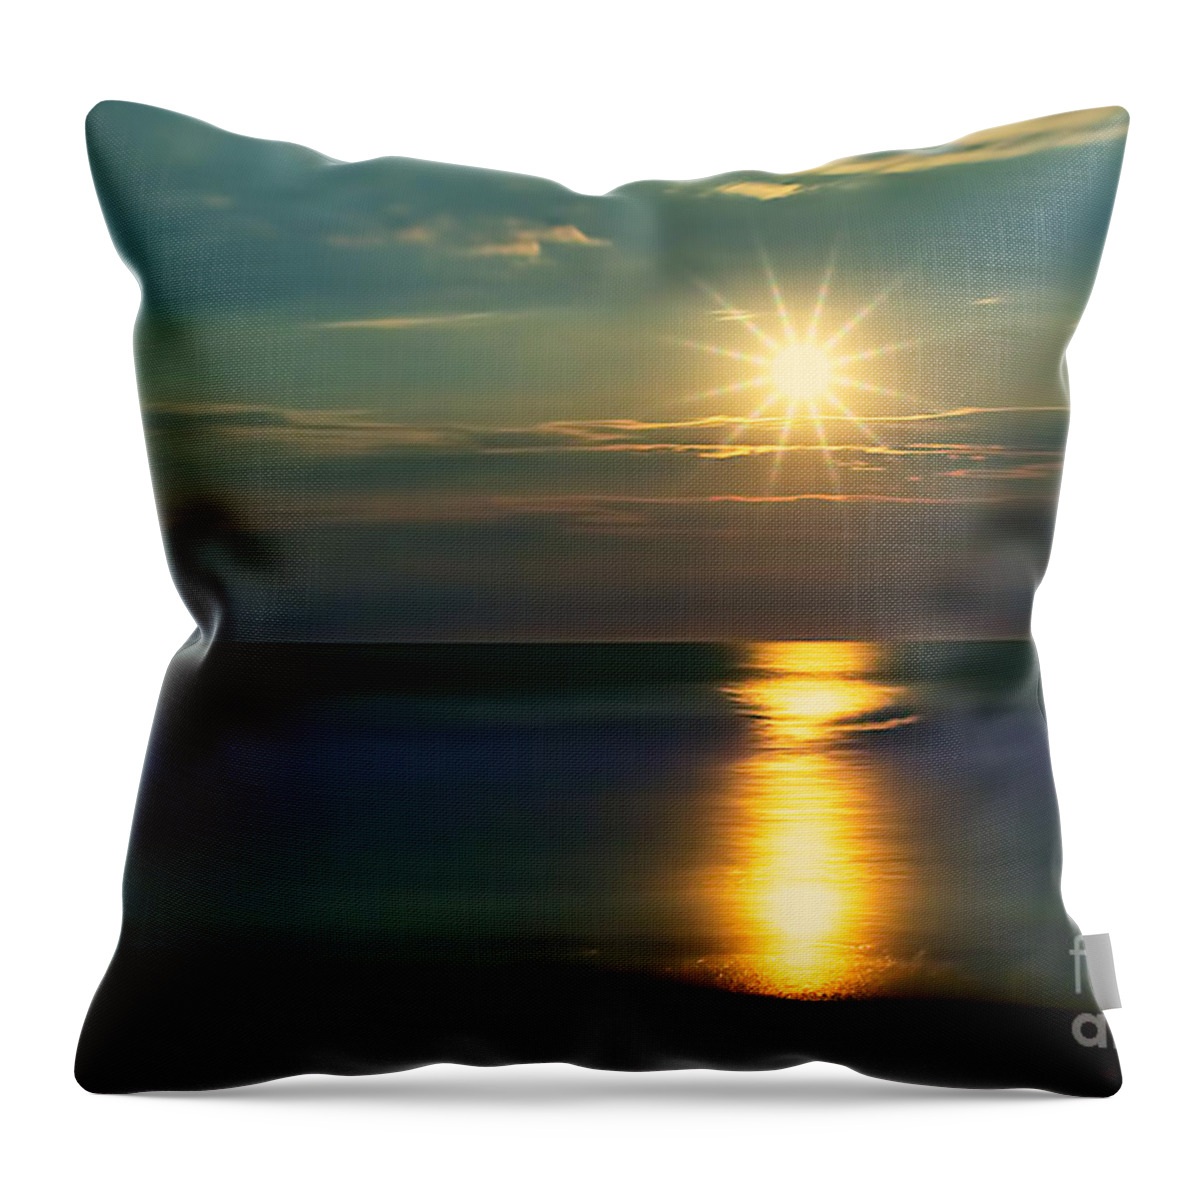 Warm Throw Pillow featuring the photograph Warm Reflections by Mark Miller